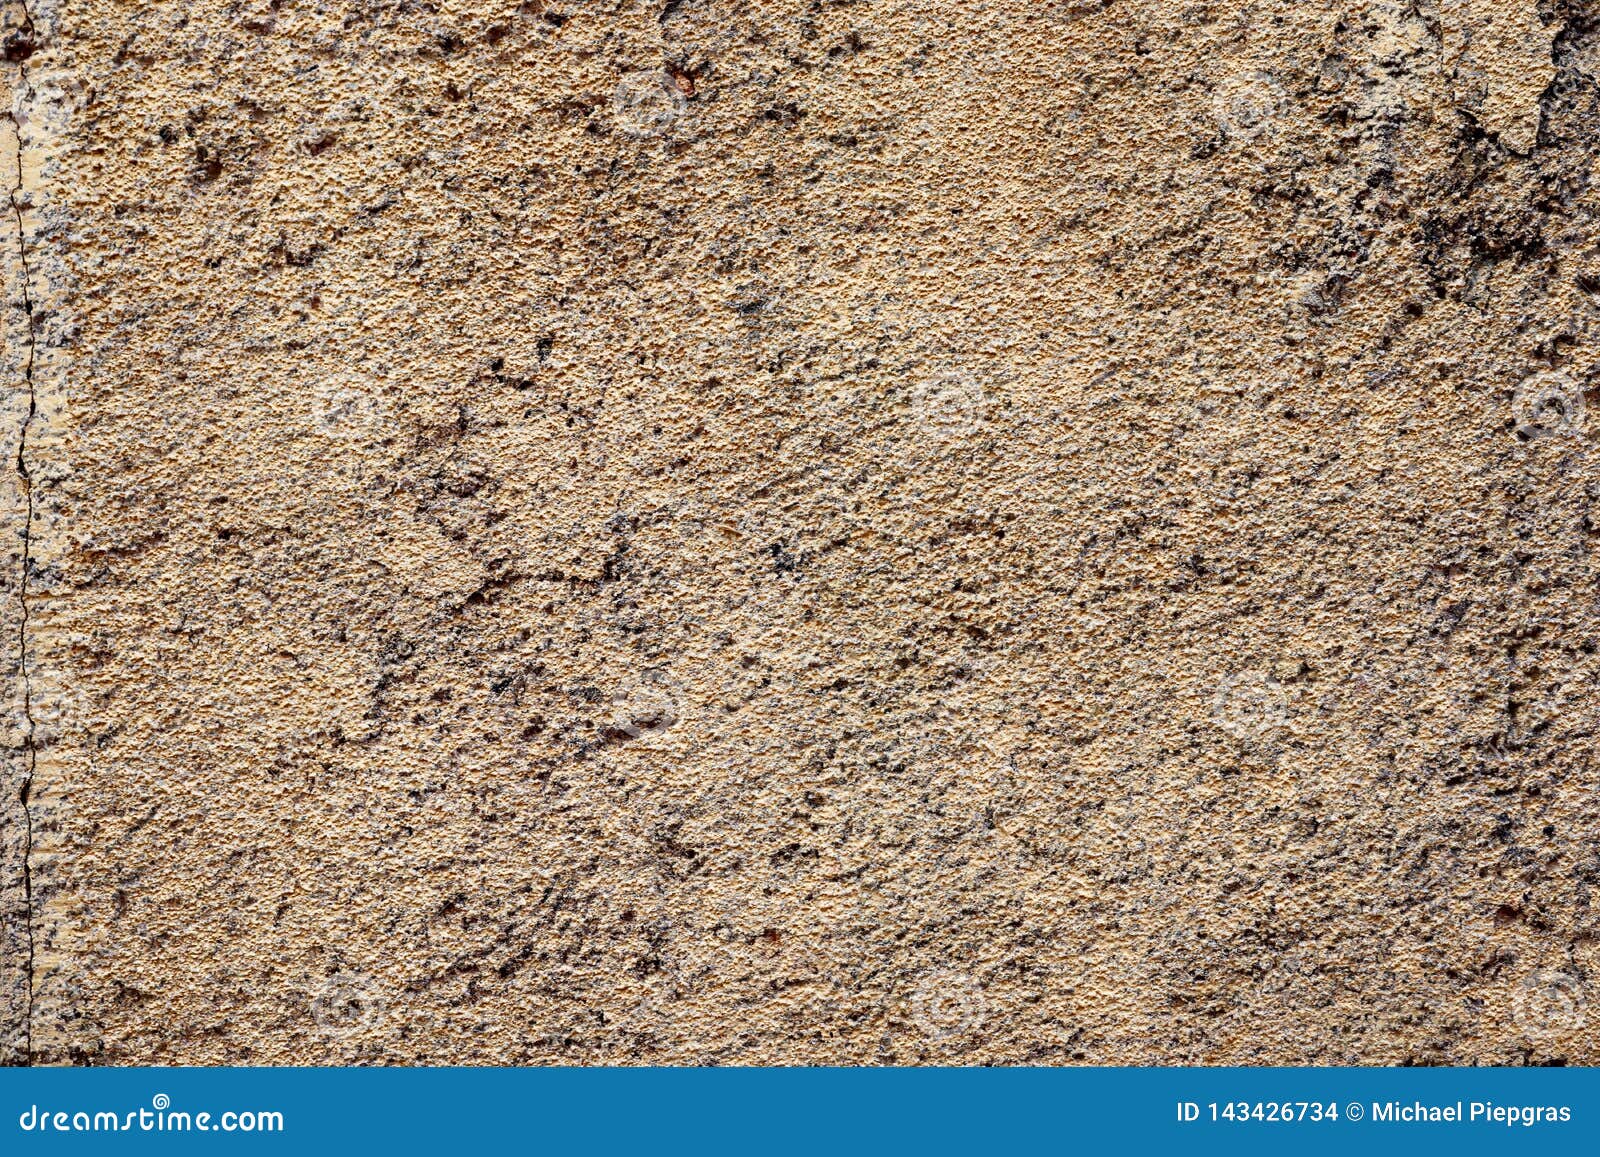 High Resolution Texture of Sand Stone and Concrete Walls Seen in Dubai ...